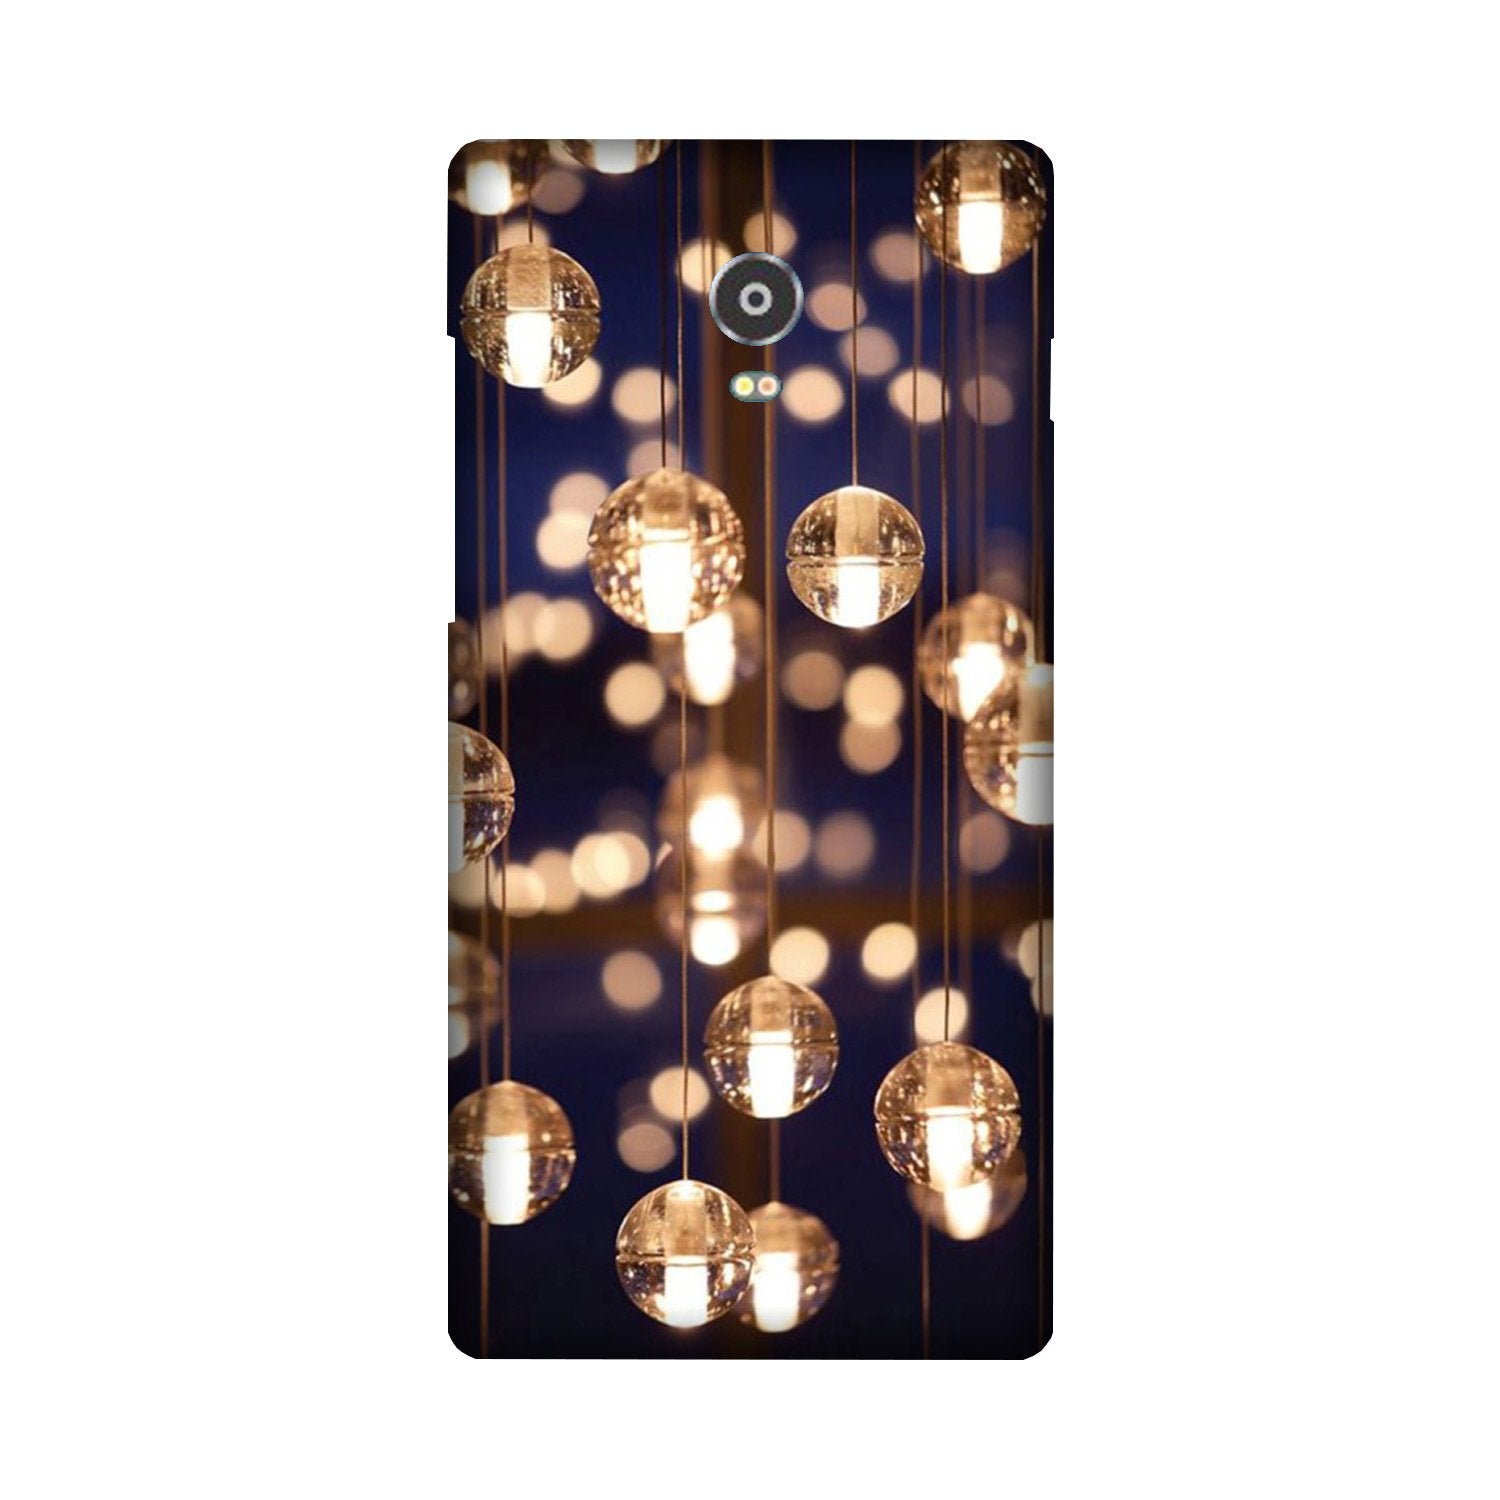 Party Bulb2 Case for Lenovo Vibe P1